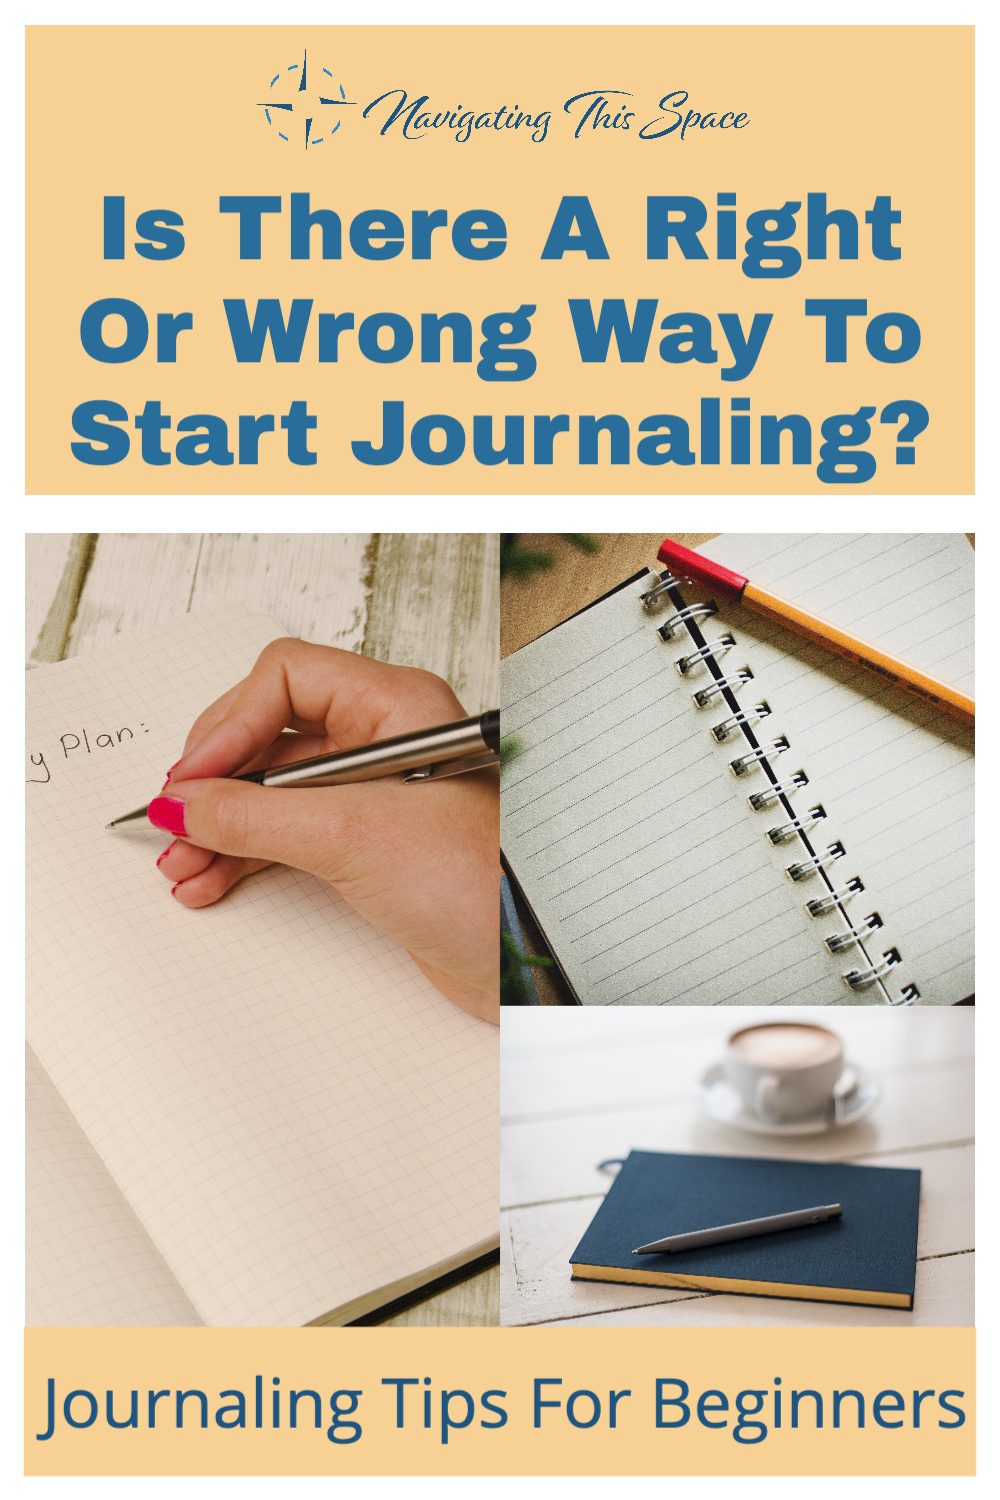 Is there a wrong or right way to start journaling?